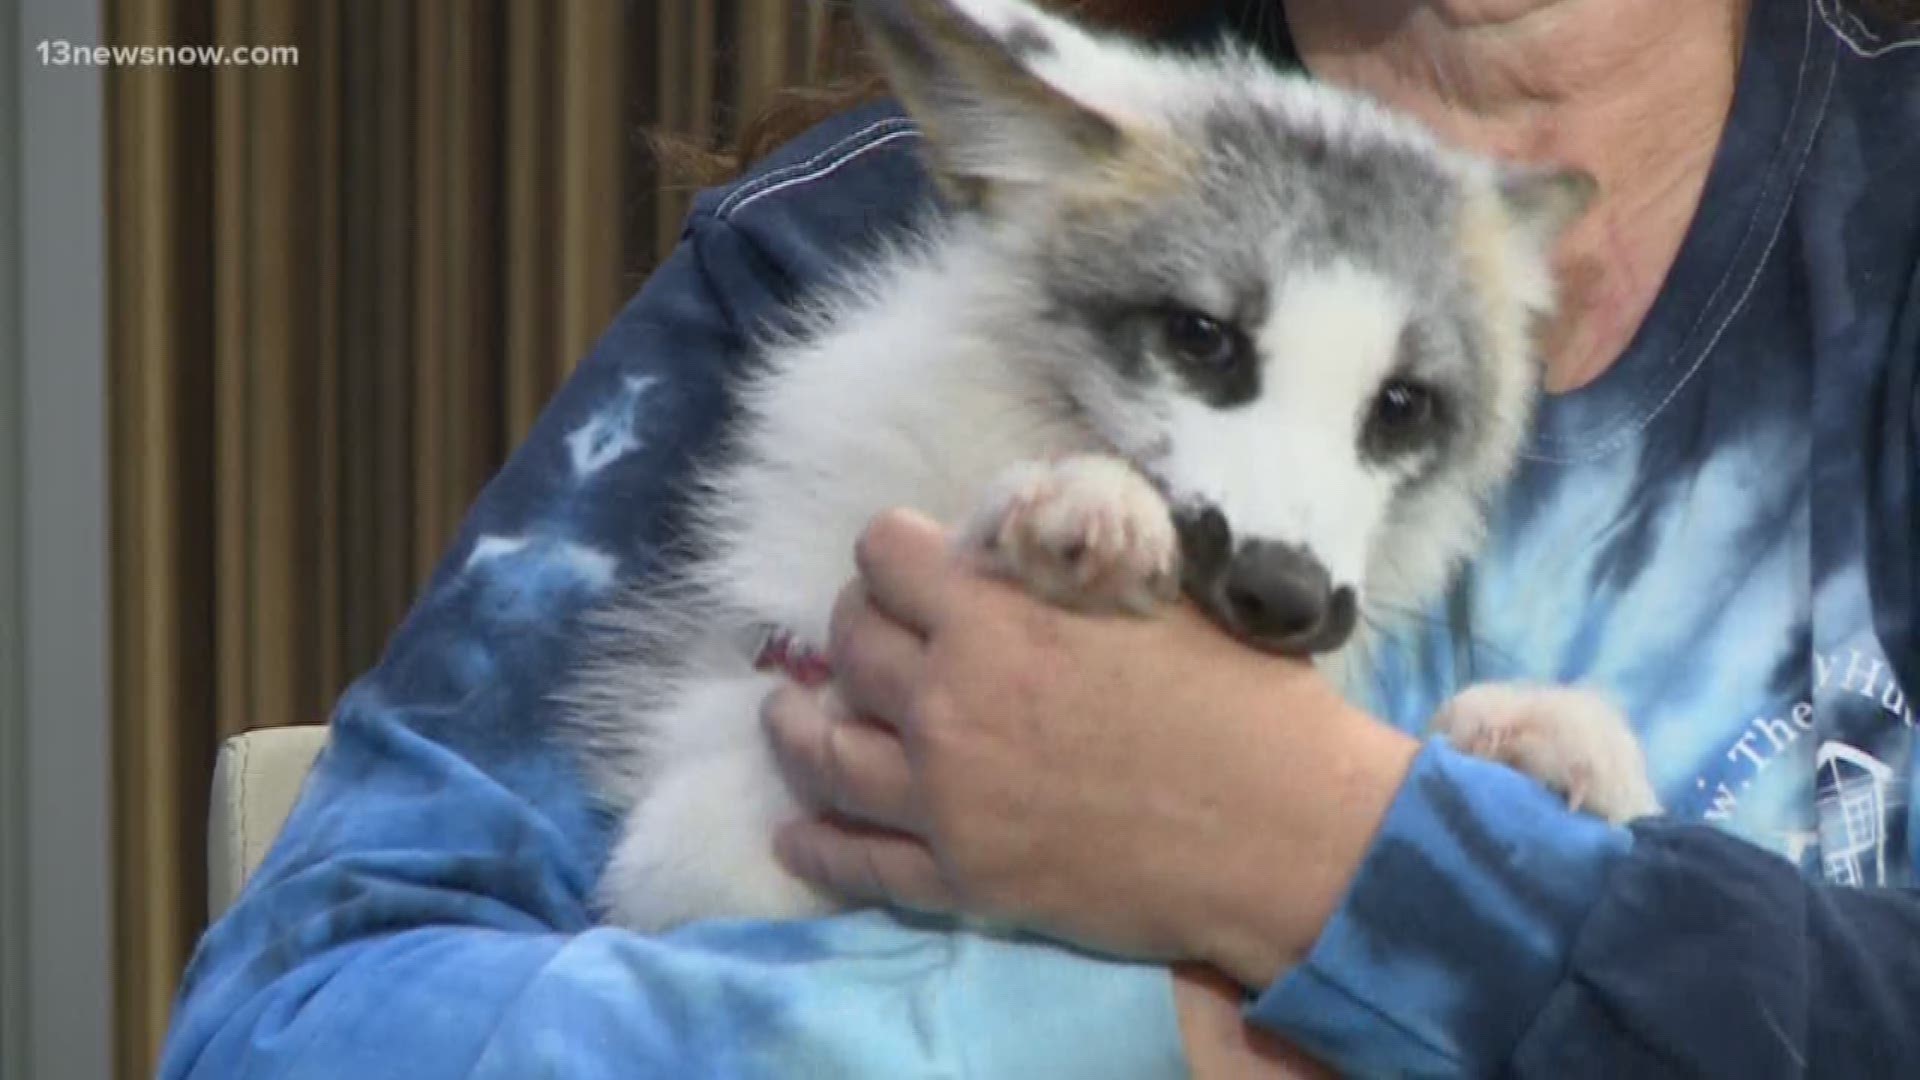 Meet Shio, a marble fox who isn't looking for a home, but is looking for help for his care.